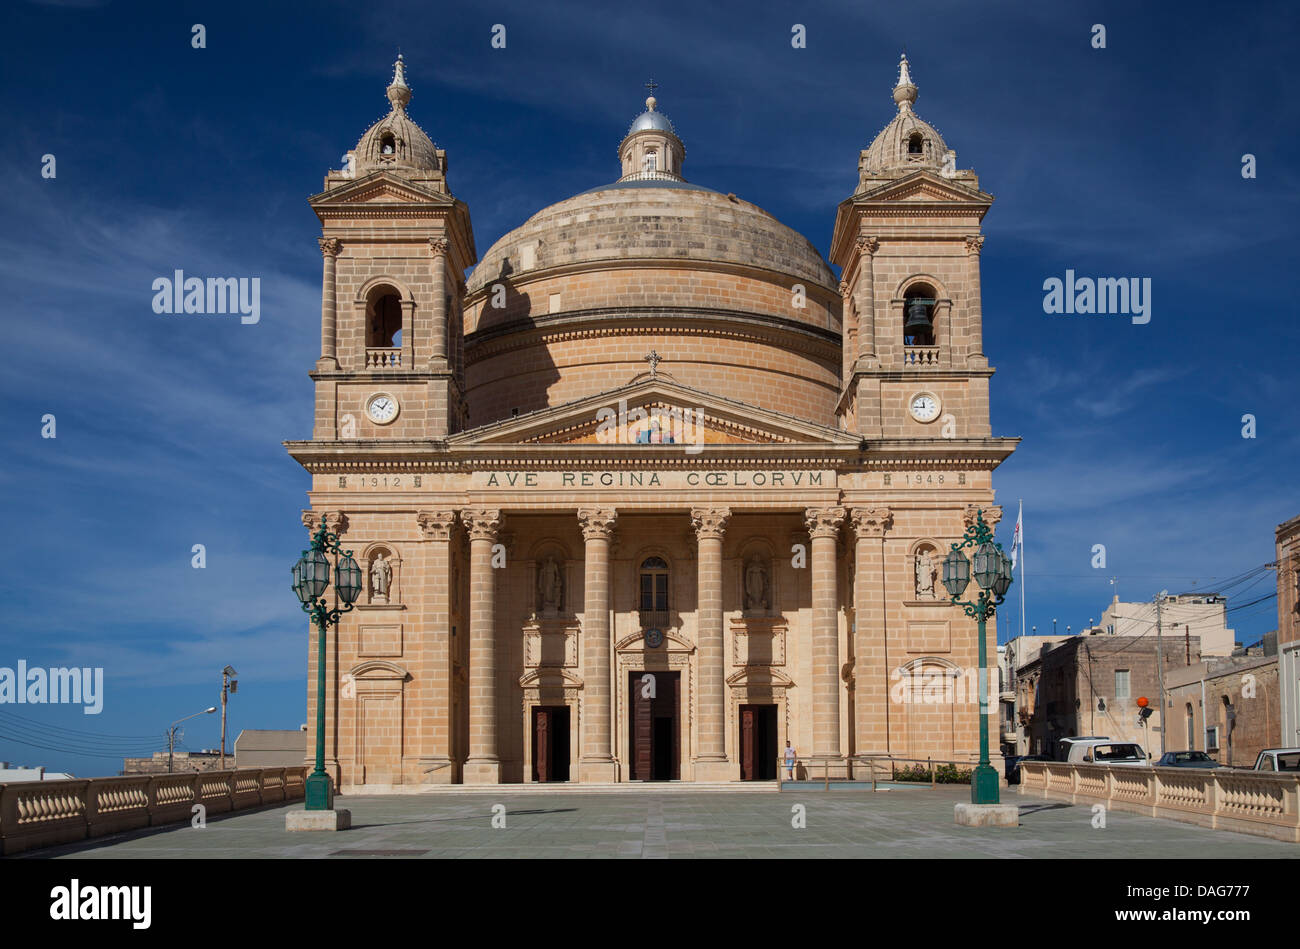 The Church of the Assumption of Our Lady, commonly known as the Rotunda of Mosta Stock Photo